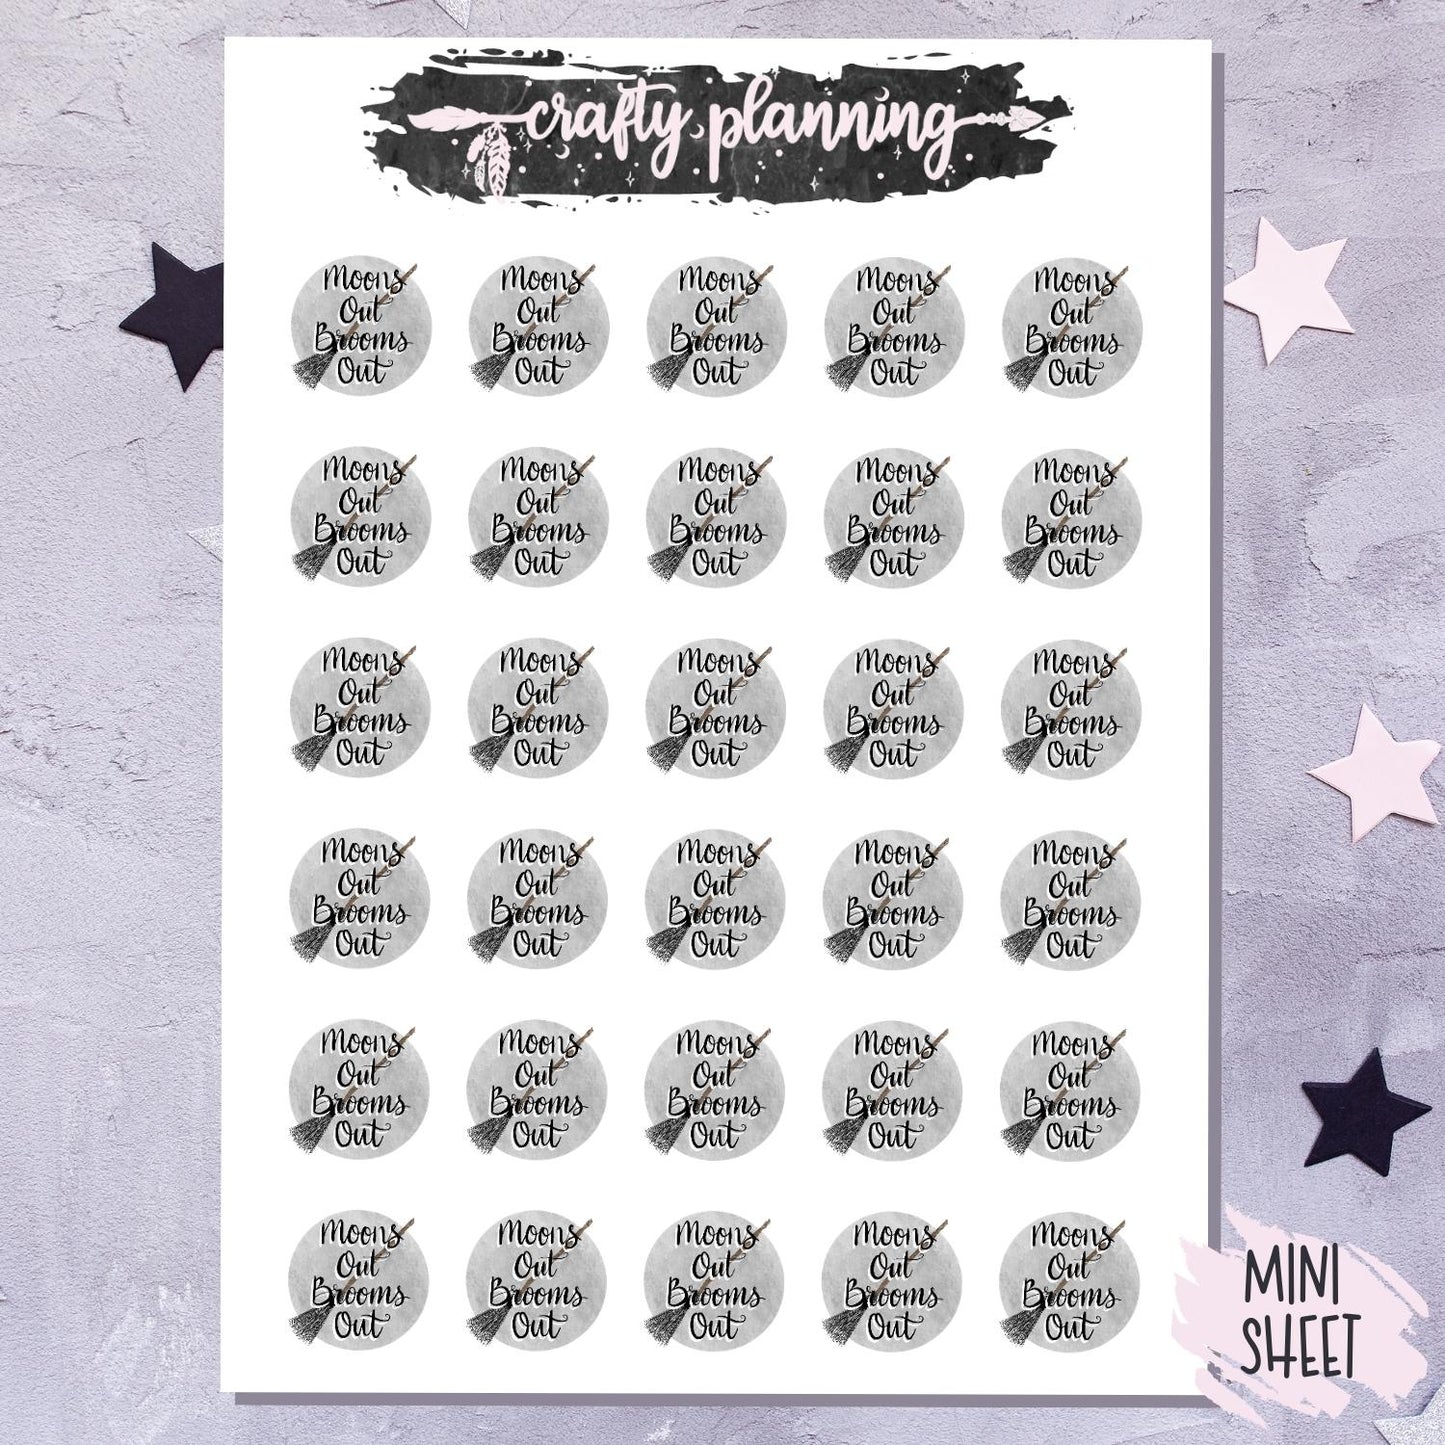 Moons Out Brooms Out - Hand Drawn - Mini Sticker Sheet